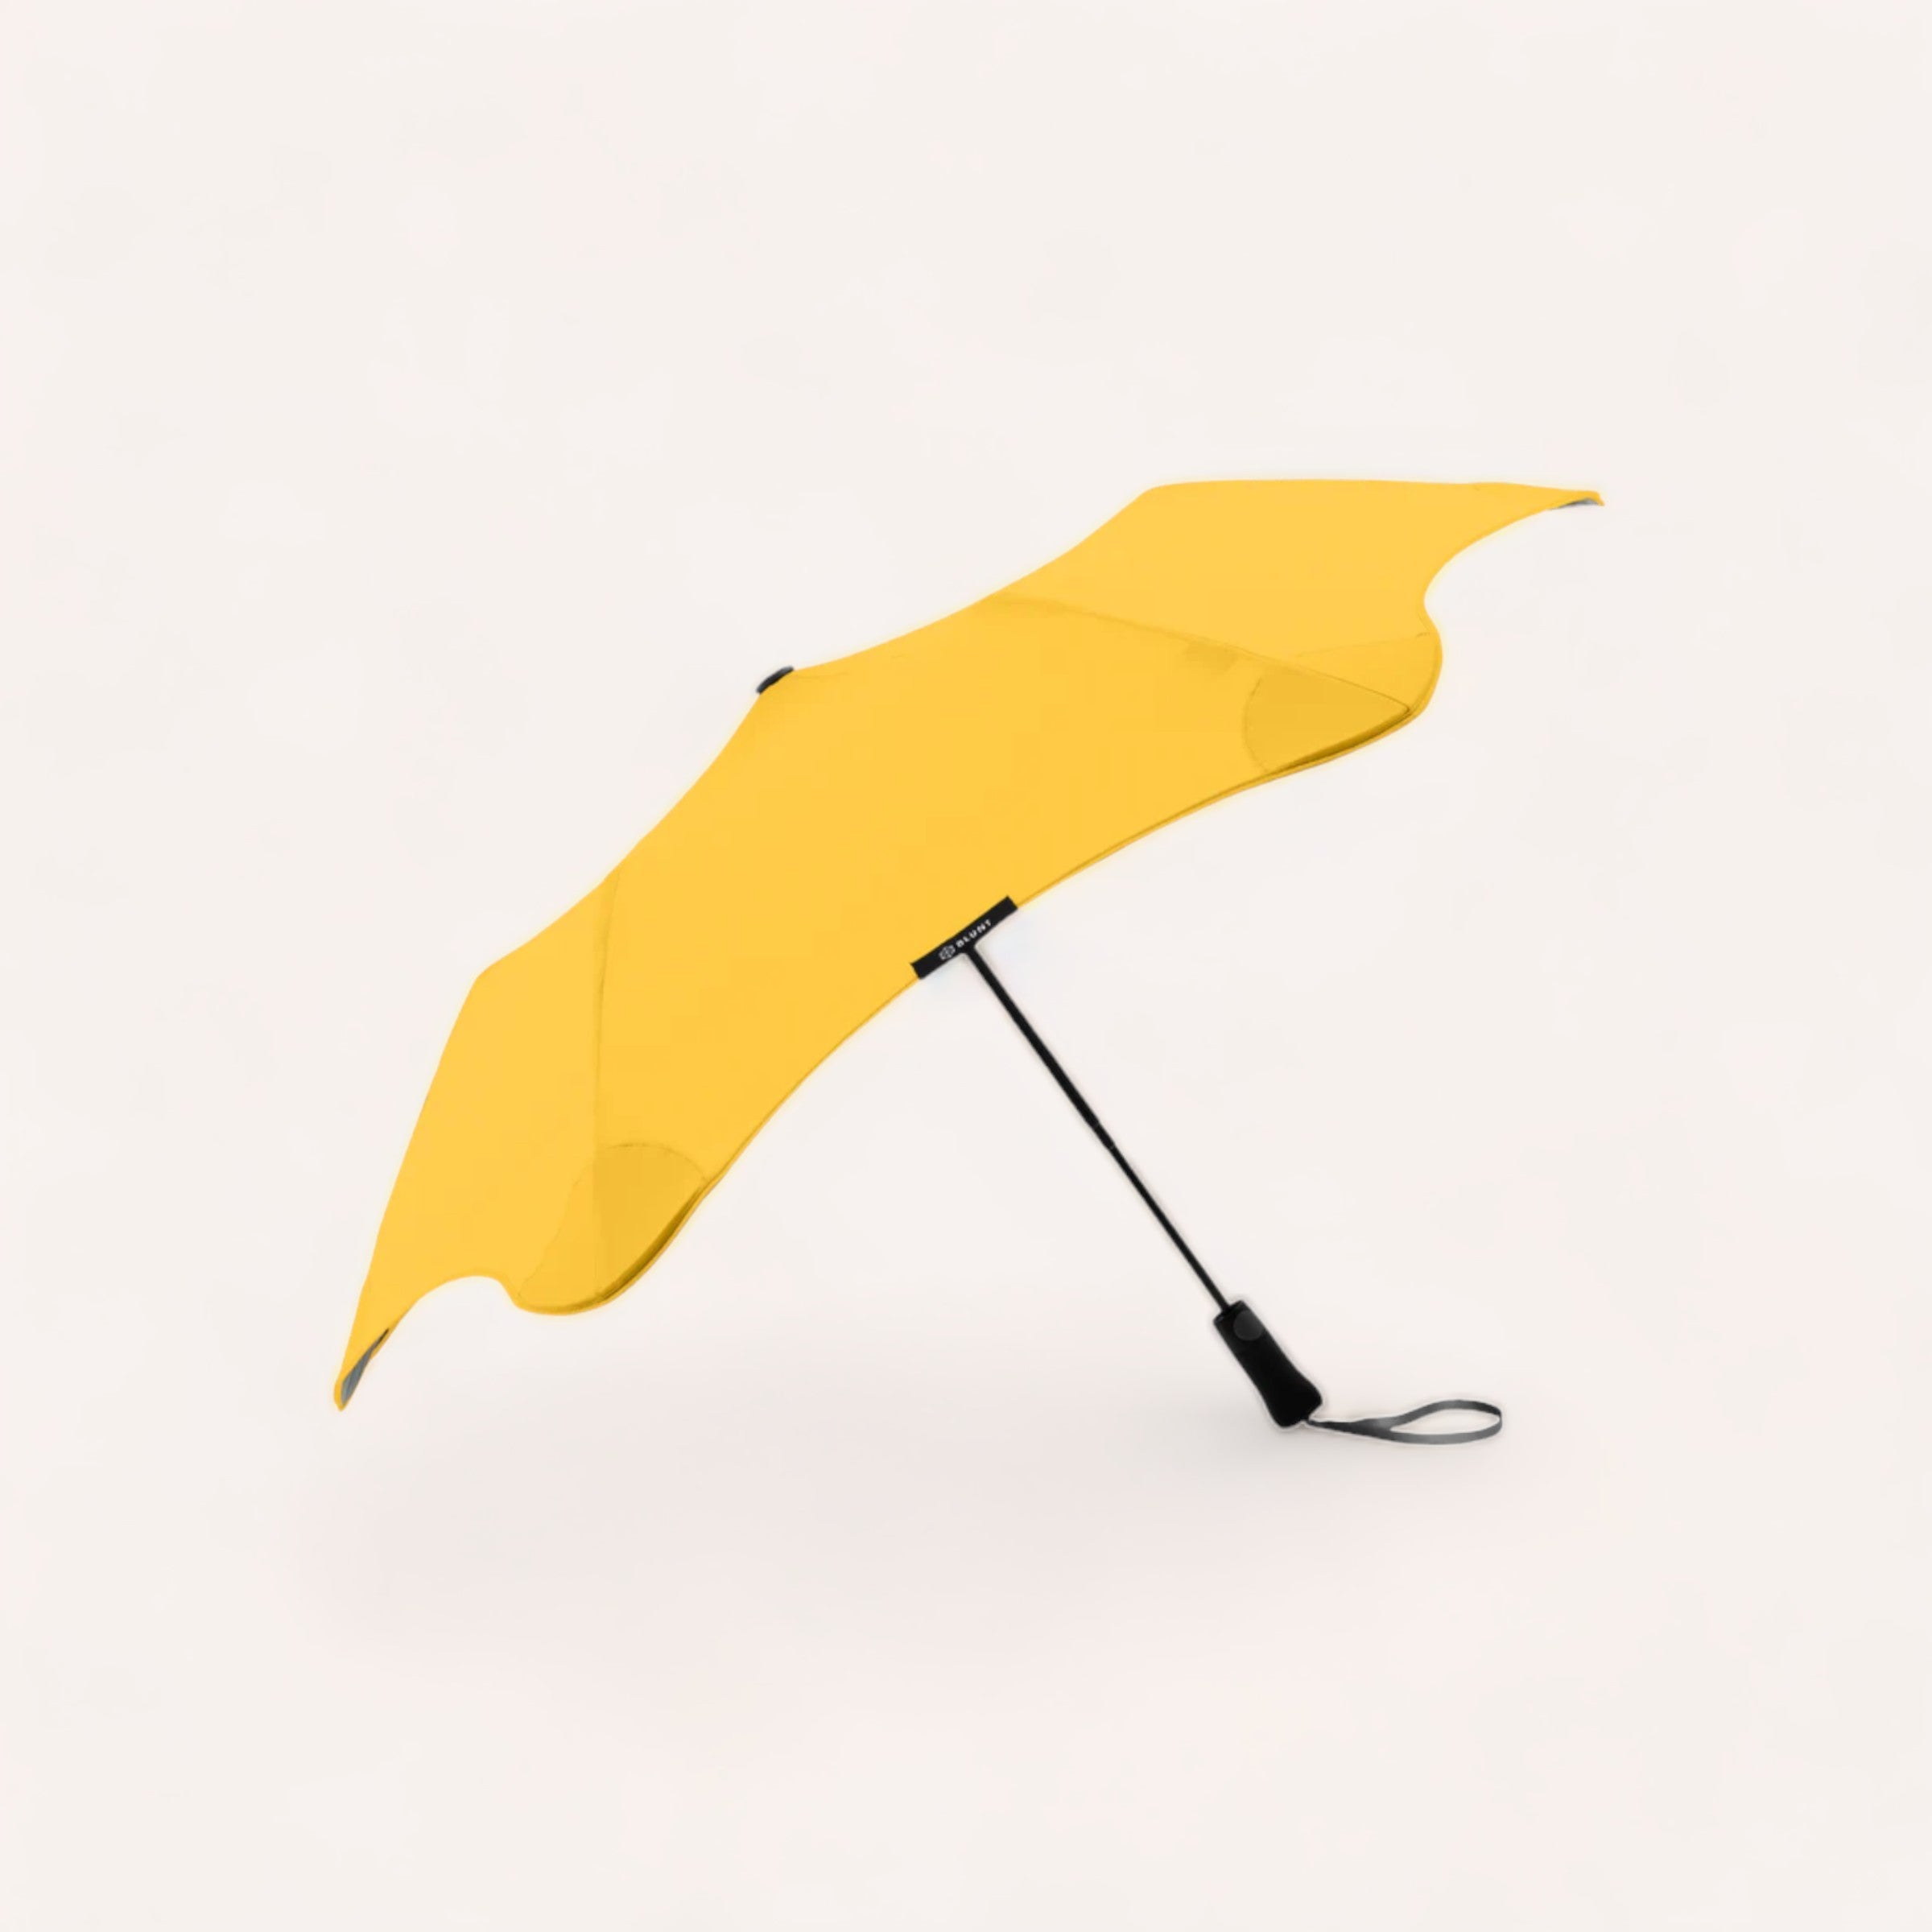 A vibrant yellow BLUNT Metro umbrella lying open against a white background.